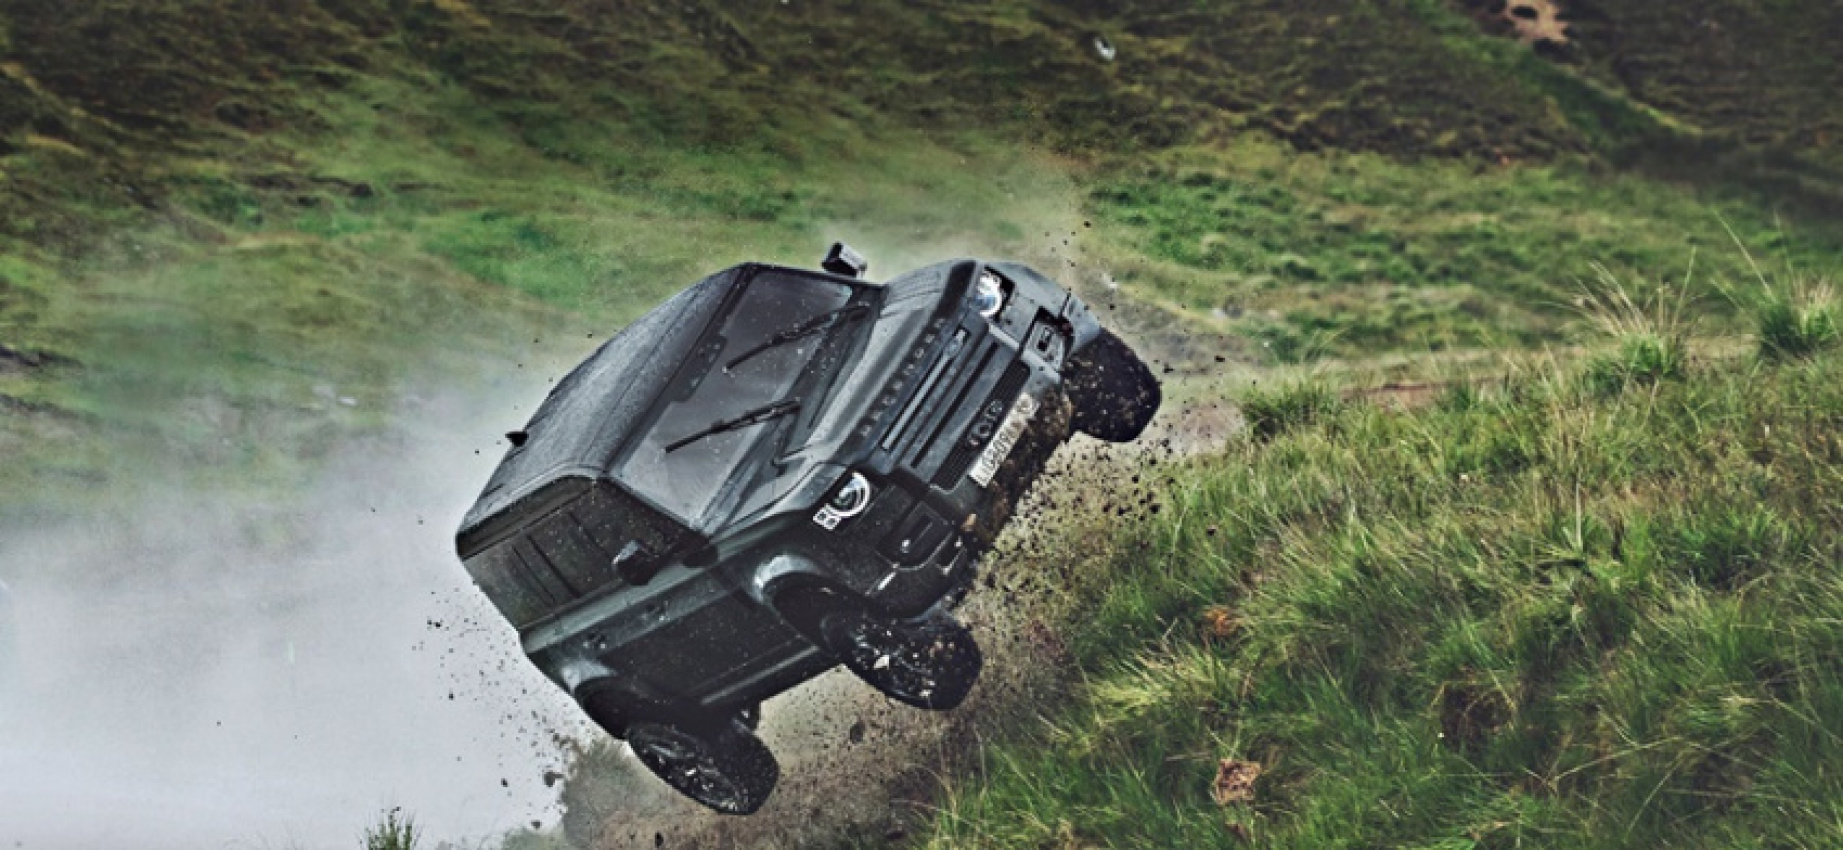 autos, cars, land rover, bowler defender challenge, james bond, land rover defender, movie franchise, land rover celebrates 60th anniversary of james bond movies by entering new defender in special event